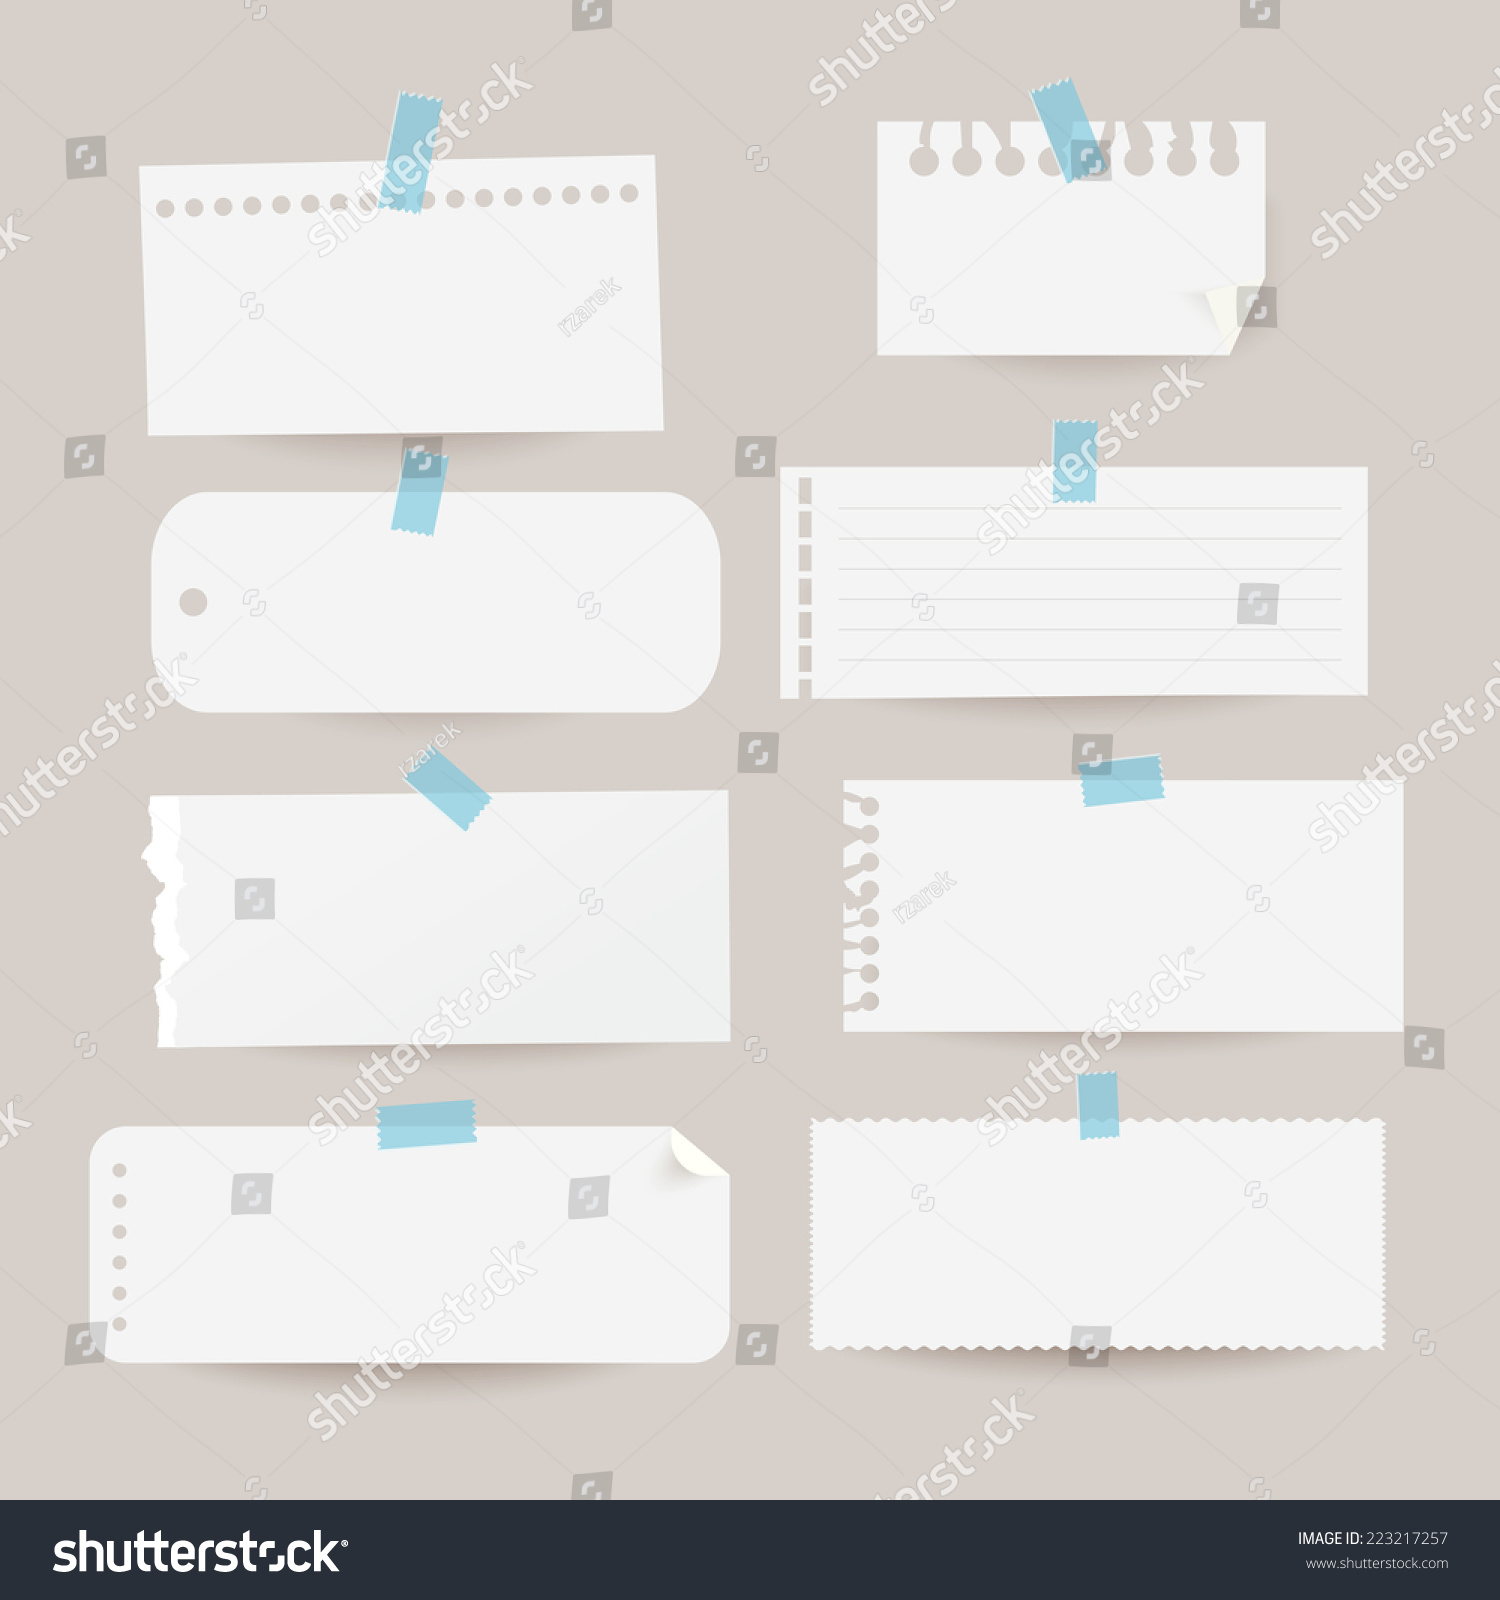 Set Of Various Note Papers. Vector Illustration. - 223217257 : Shutterstock